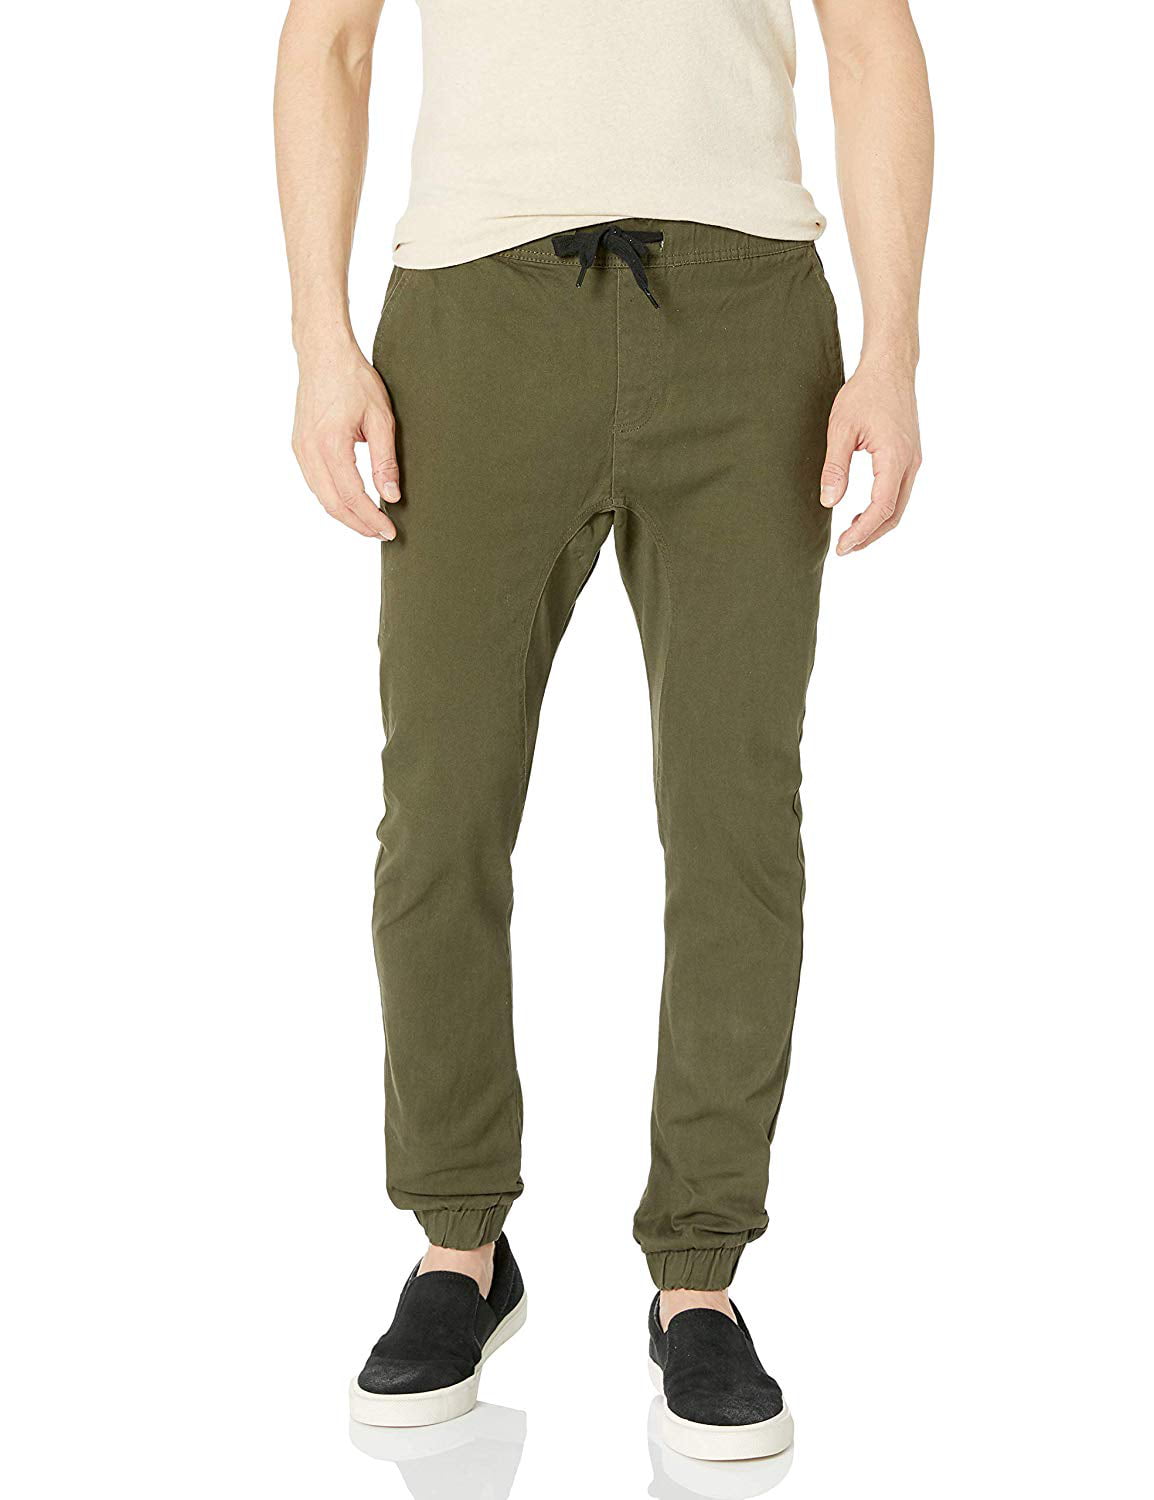 SOUTHPOLE - Southpole Mens Basic Stretch Twill Jogger Pant, Adult ...